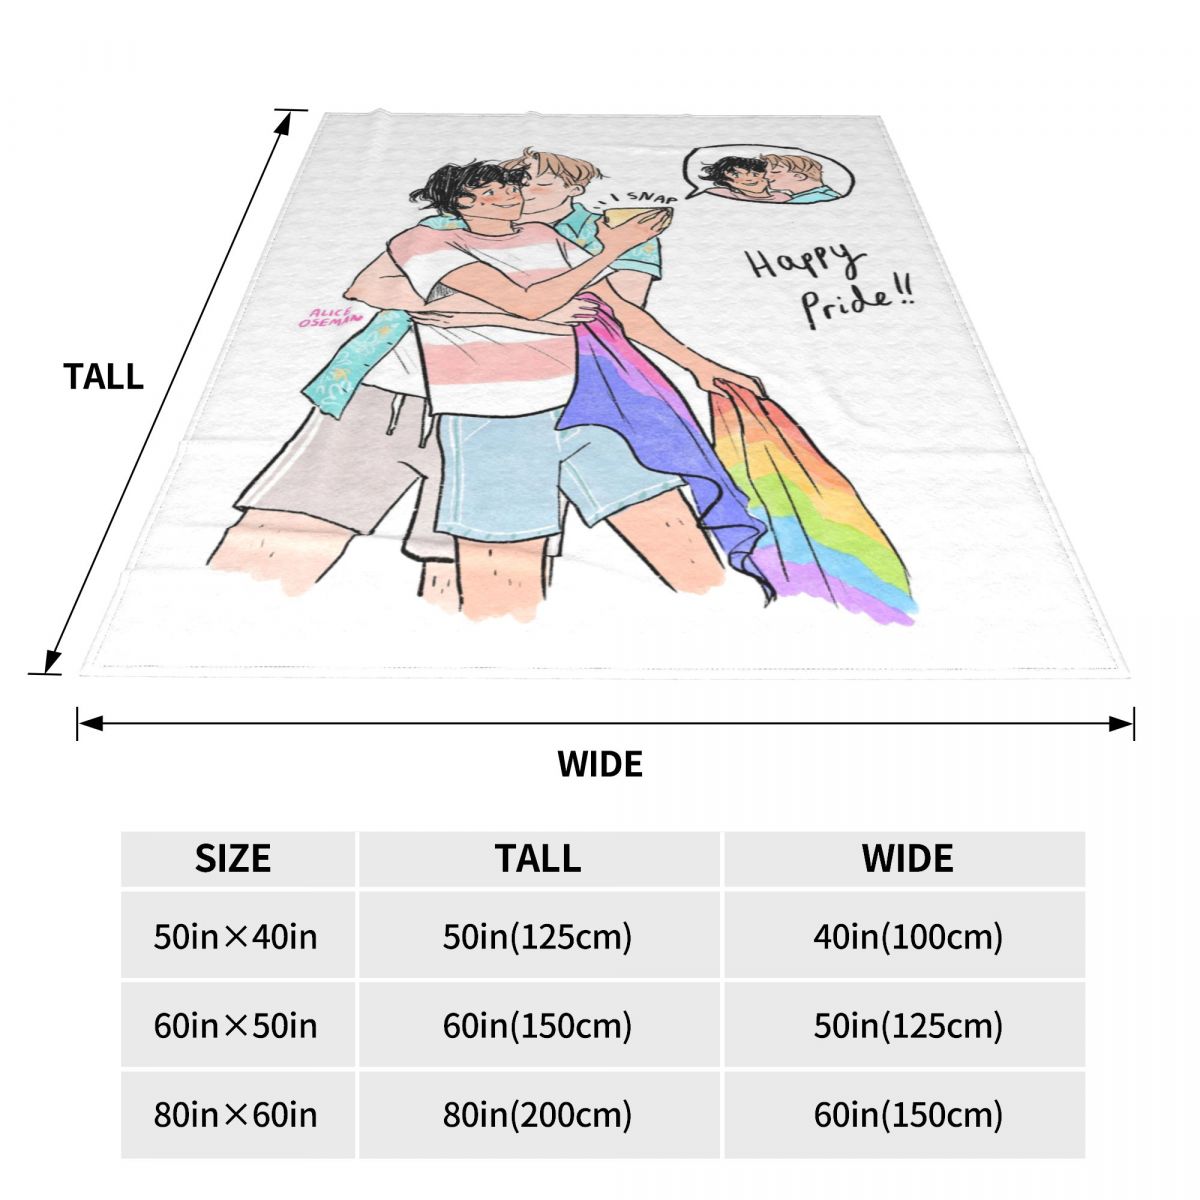 Heartstopper Nick Charlie Kiss Blanket Cover Anime Lgbt Yaoi Boy Love Throw Blankets Summer Air Conditioning Soft Warm Bedspread